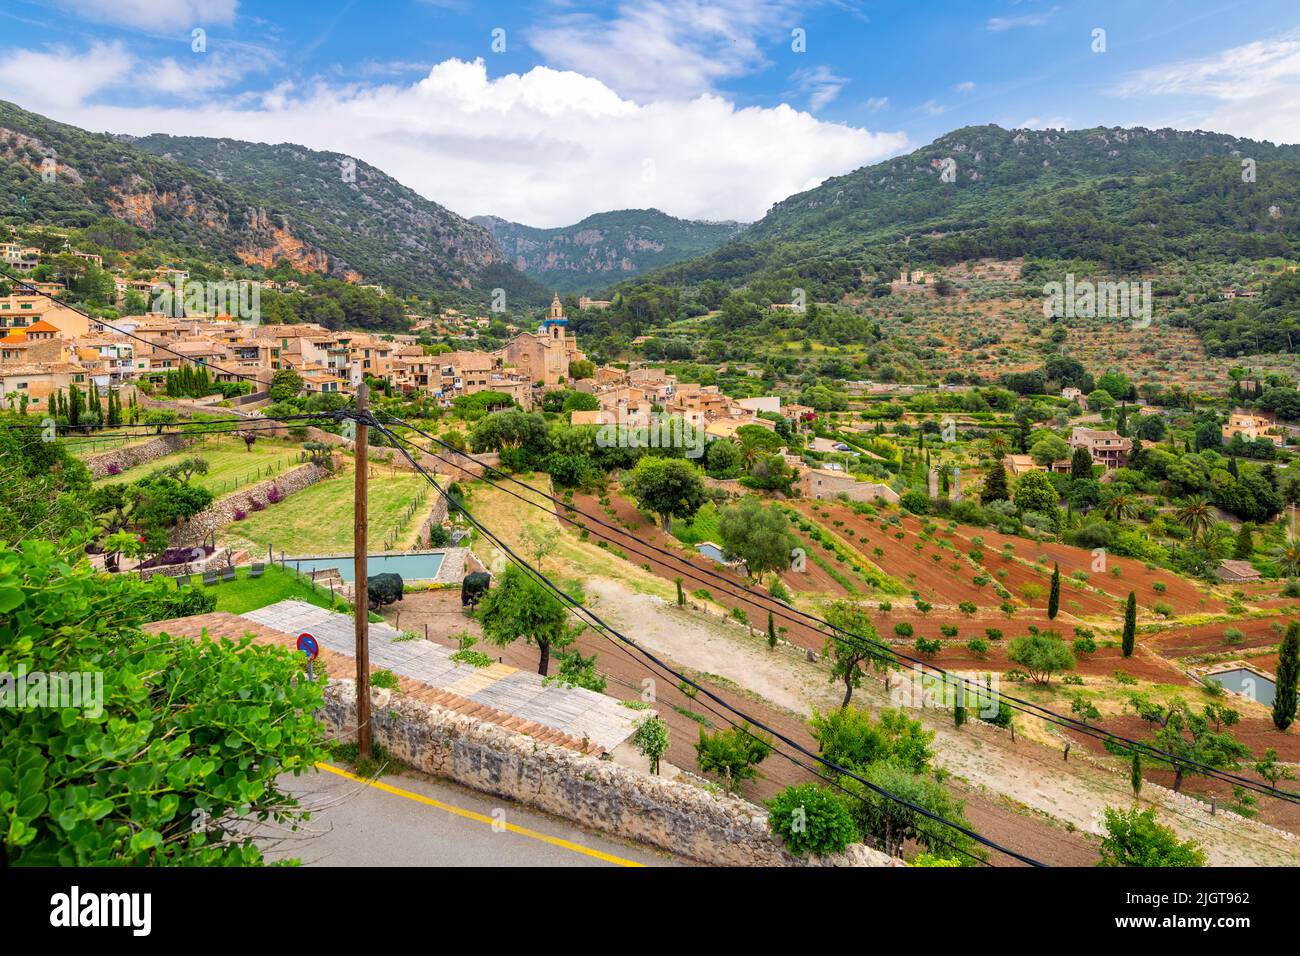 HIllside view of the Soller Valley and the picturesque villages of Valldemossa, Spain, on the island of Mallorca. Stock Photo